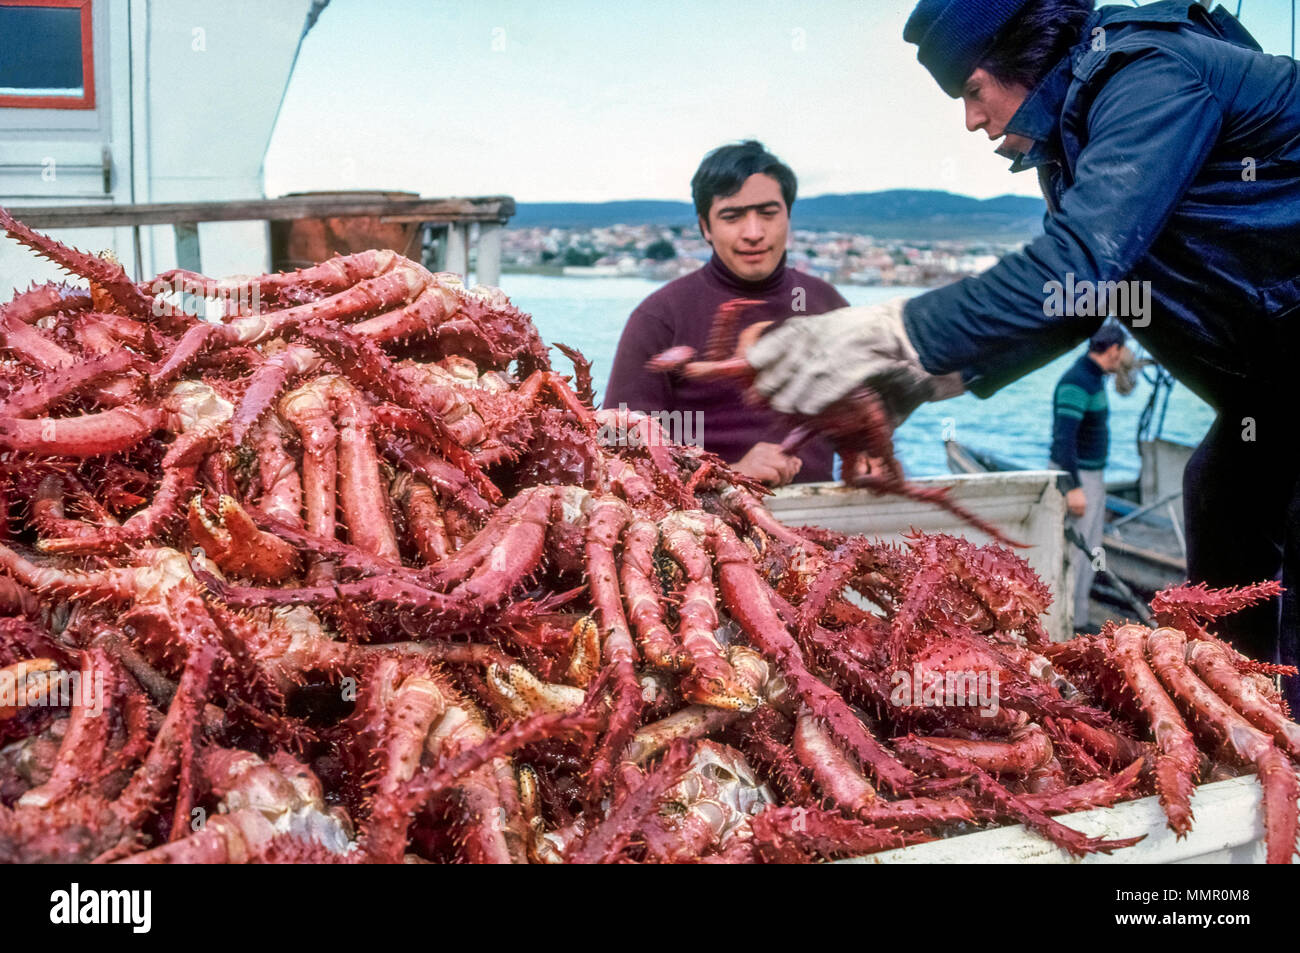 Freshly-caught King Crab are being unloaded from a fishing boat in the harbor at Punta Arenas, the southernmost city in Chile, South America. Known for their sweet and delicate meat, these large crustaceans are wild caught in traps during the July through November season. The annual Chilean catch is more than 4,000 tons, 90 percent of which is exported. Stock Photo